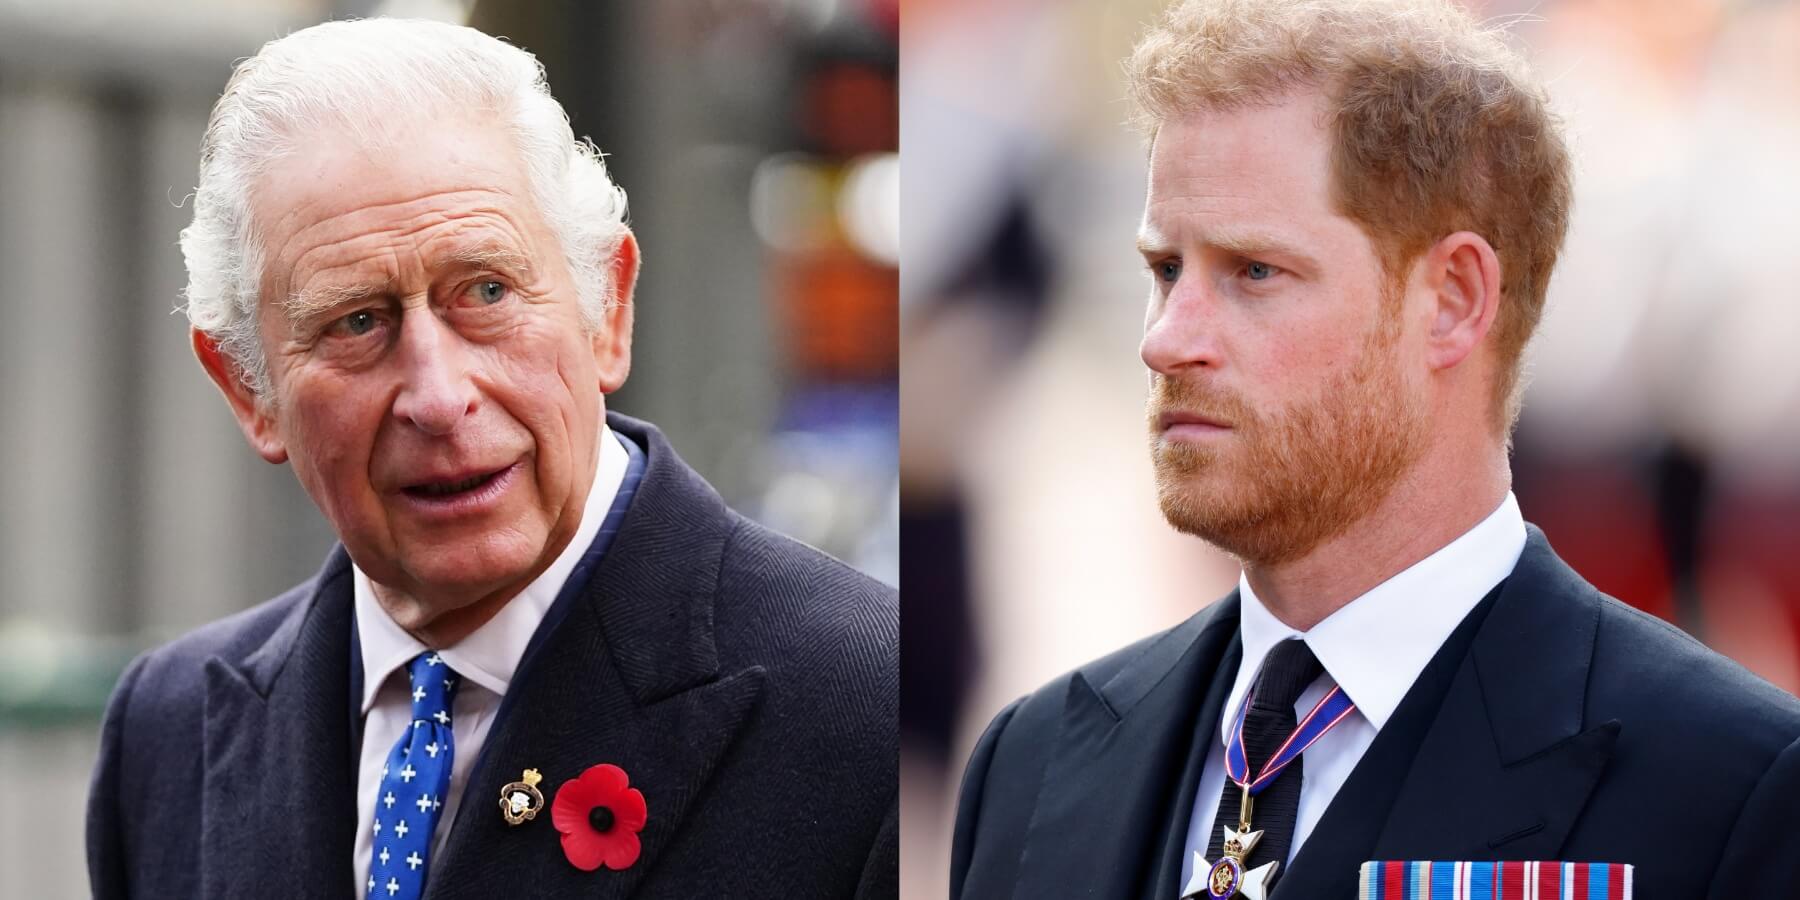 King Charles and Prince Harry in side-by-side photographs